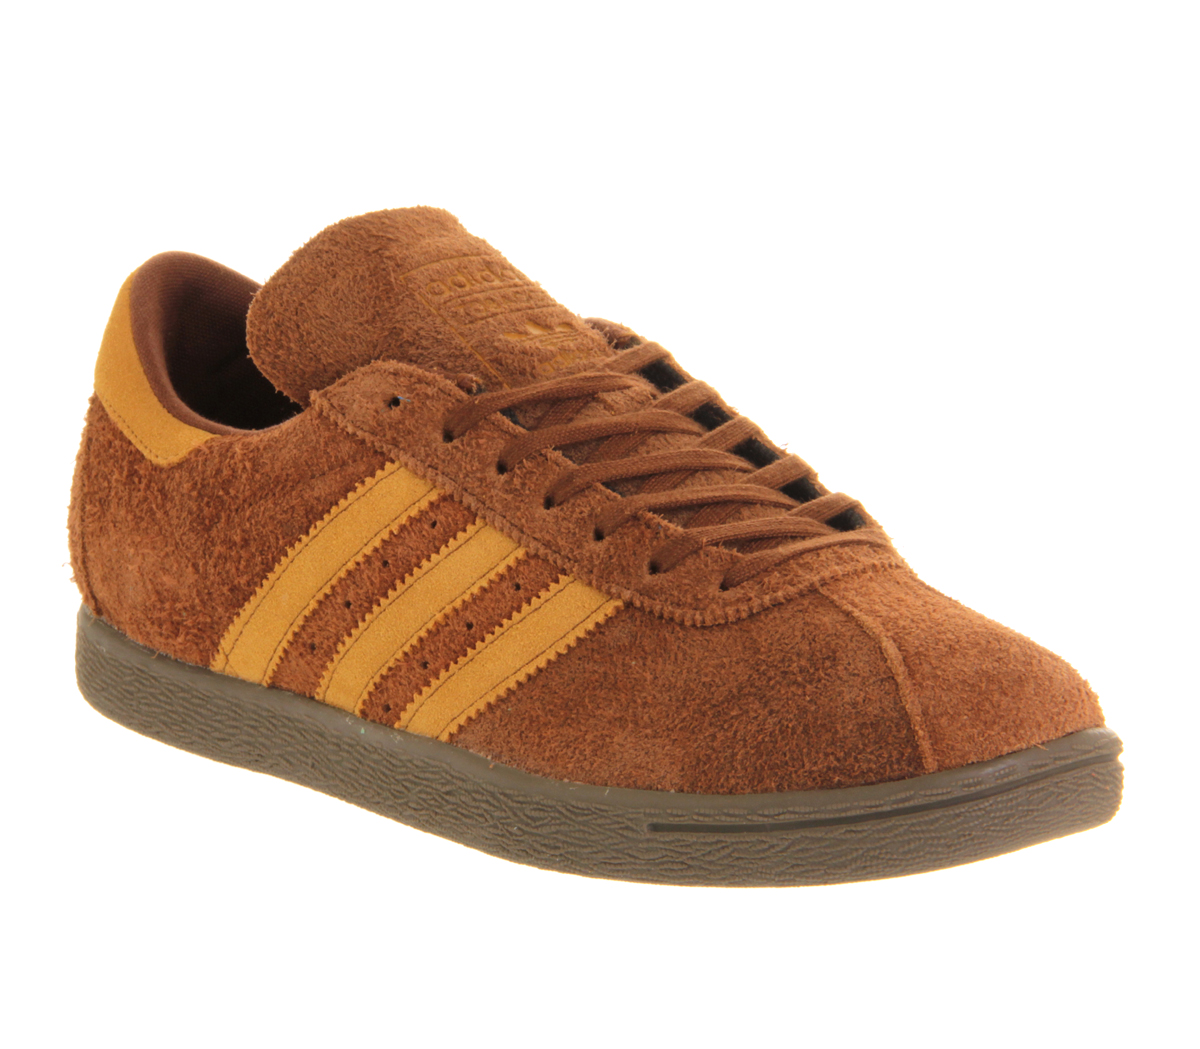 adidas Tobacco Bark Wheat Cargo Brown - His trainers